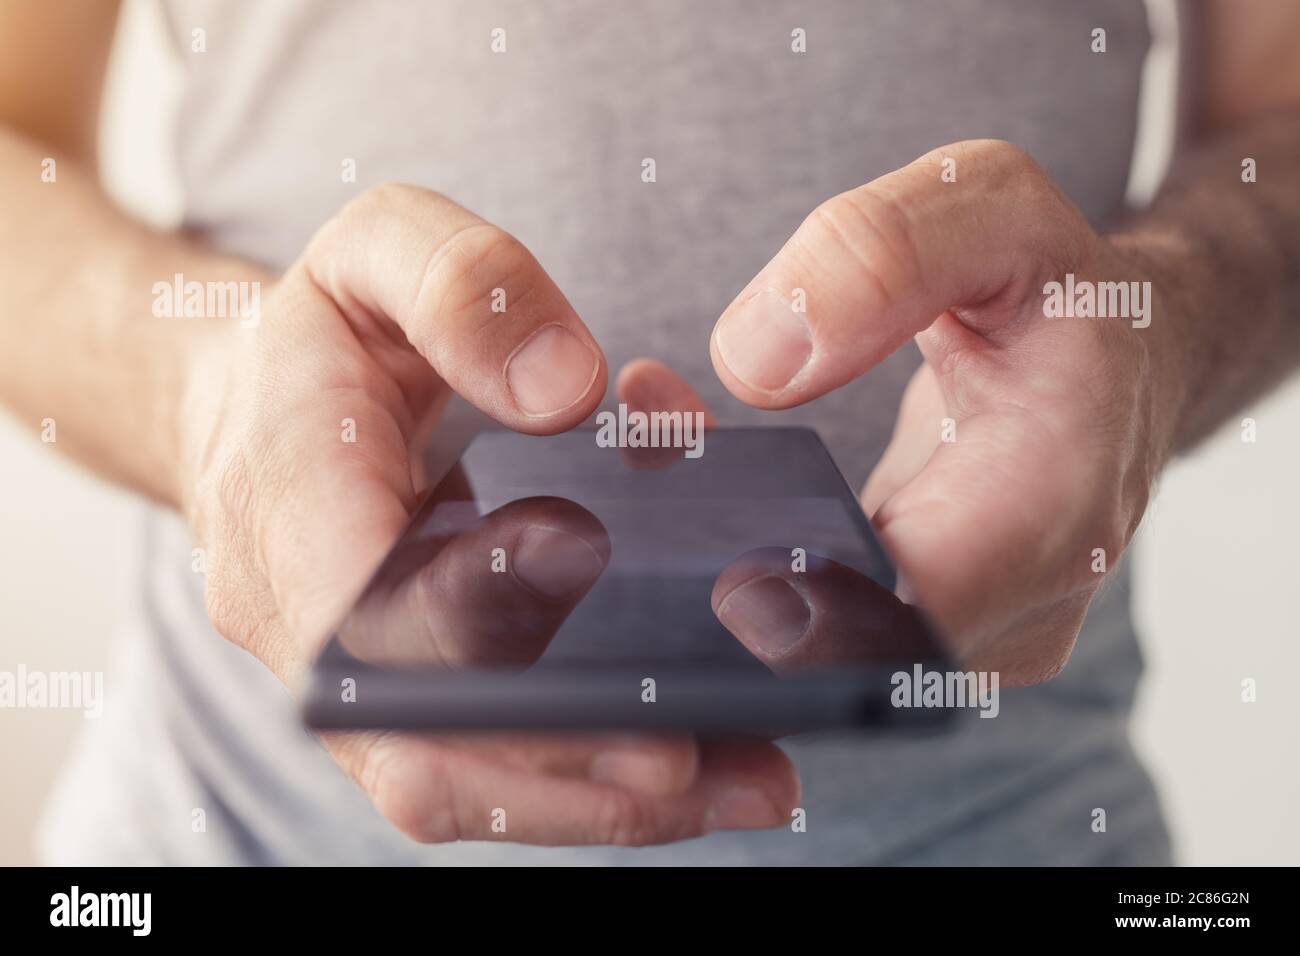 Close up of male hands typing text message on smartphone, selective focus Stock Photo